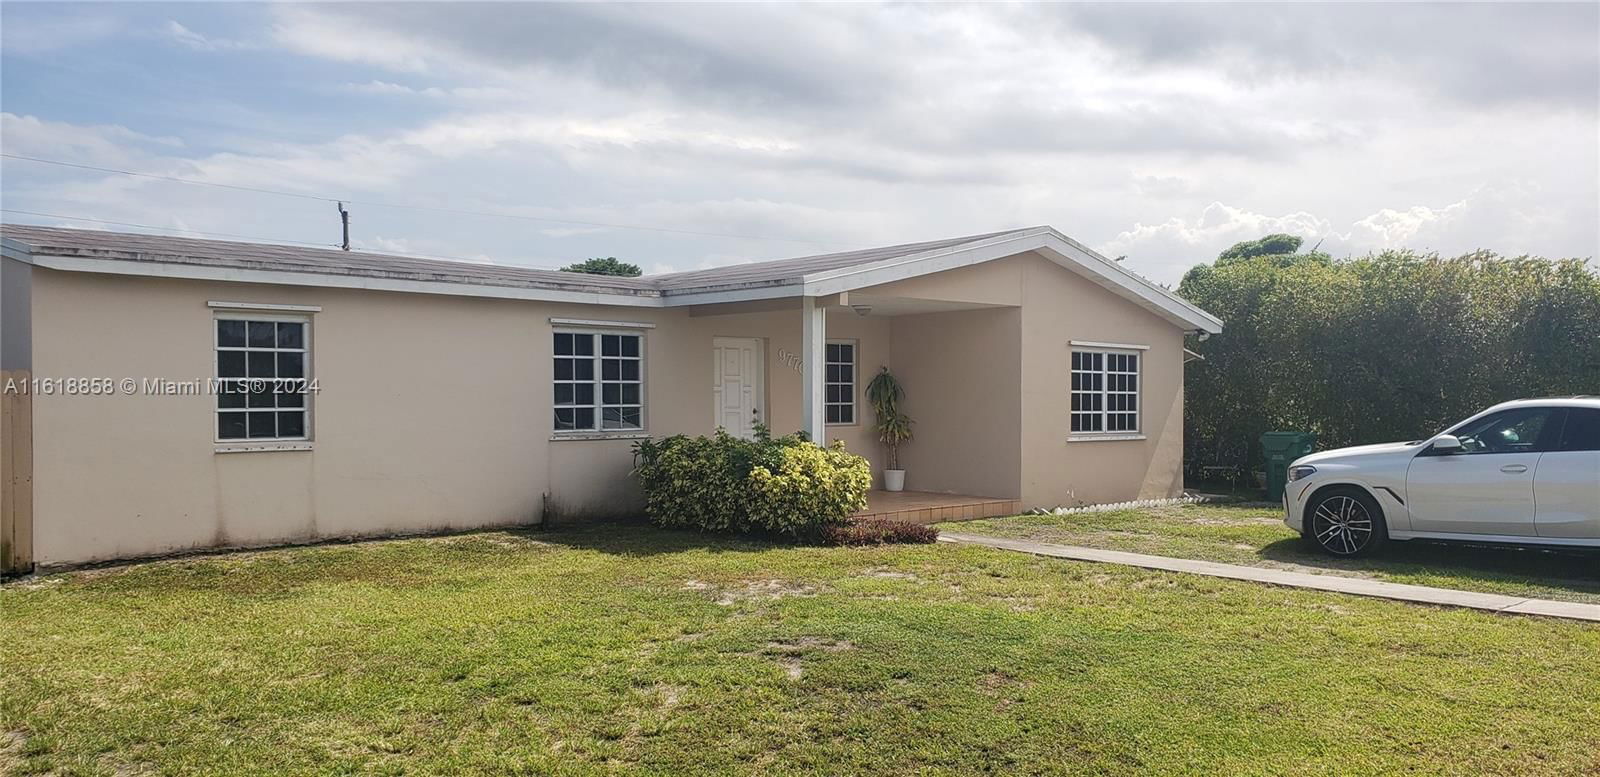 Real estate property located at 9770 53rd St, Miami-Dade County, TROPICAL ESTATES 1ST ADDN, Miami, FL